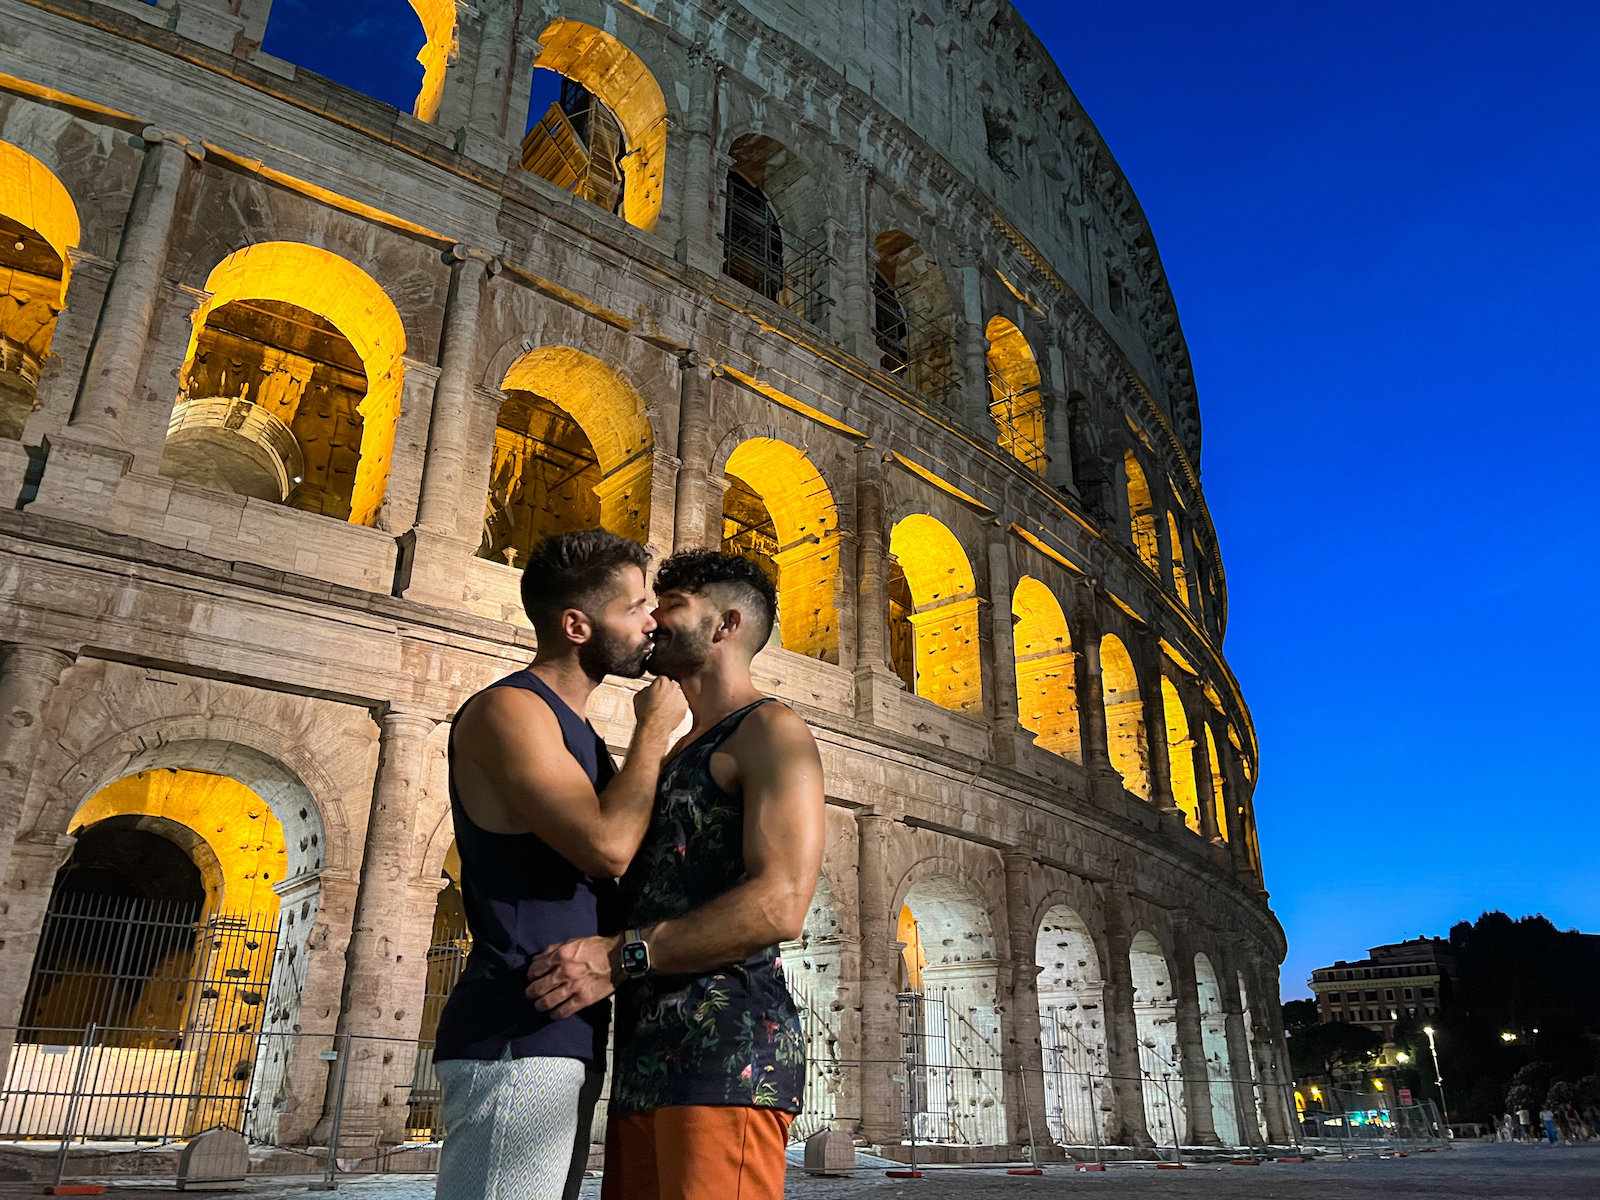 The Nomadic Boys kissing in front of the Colosseum in Rome at dusk, with the arches of the Colosseum lit up.